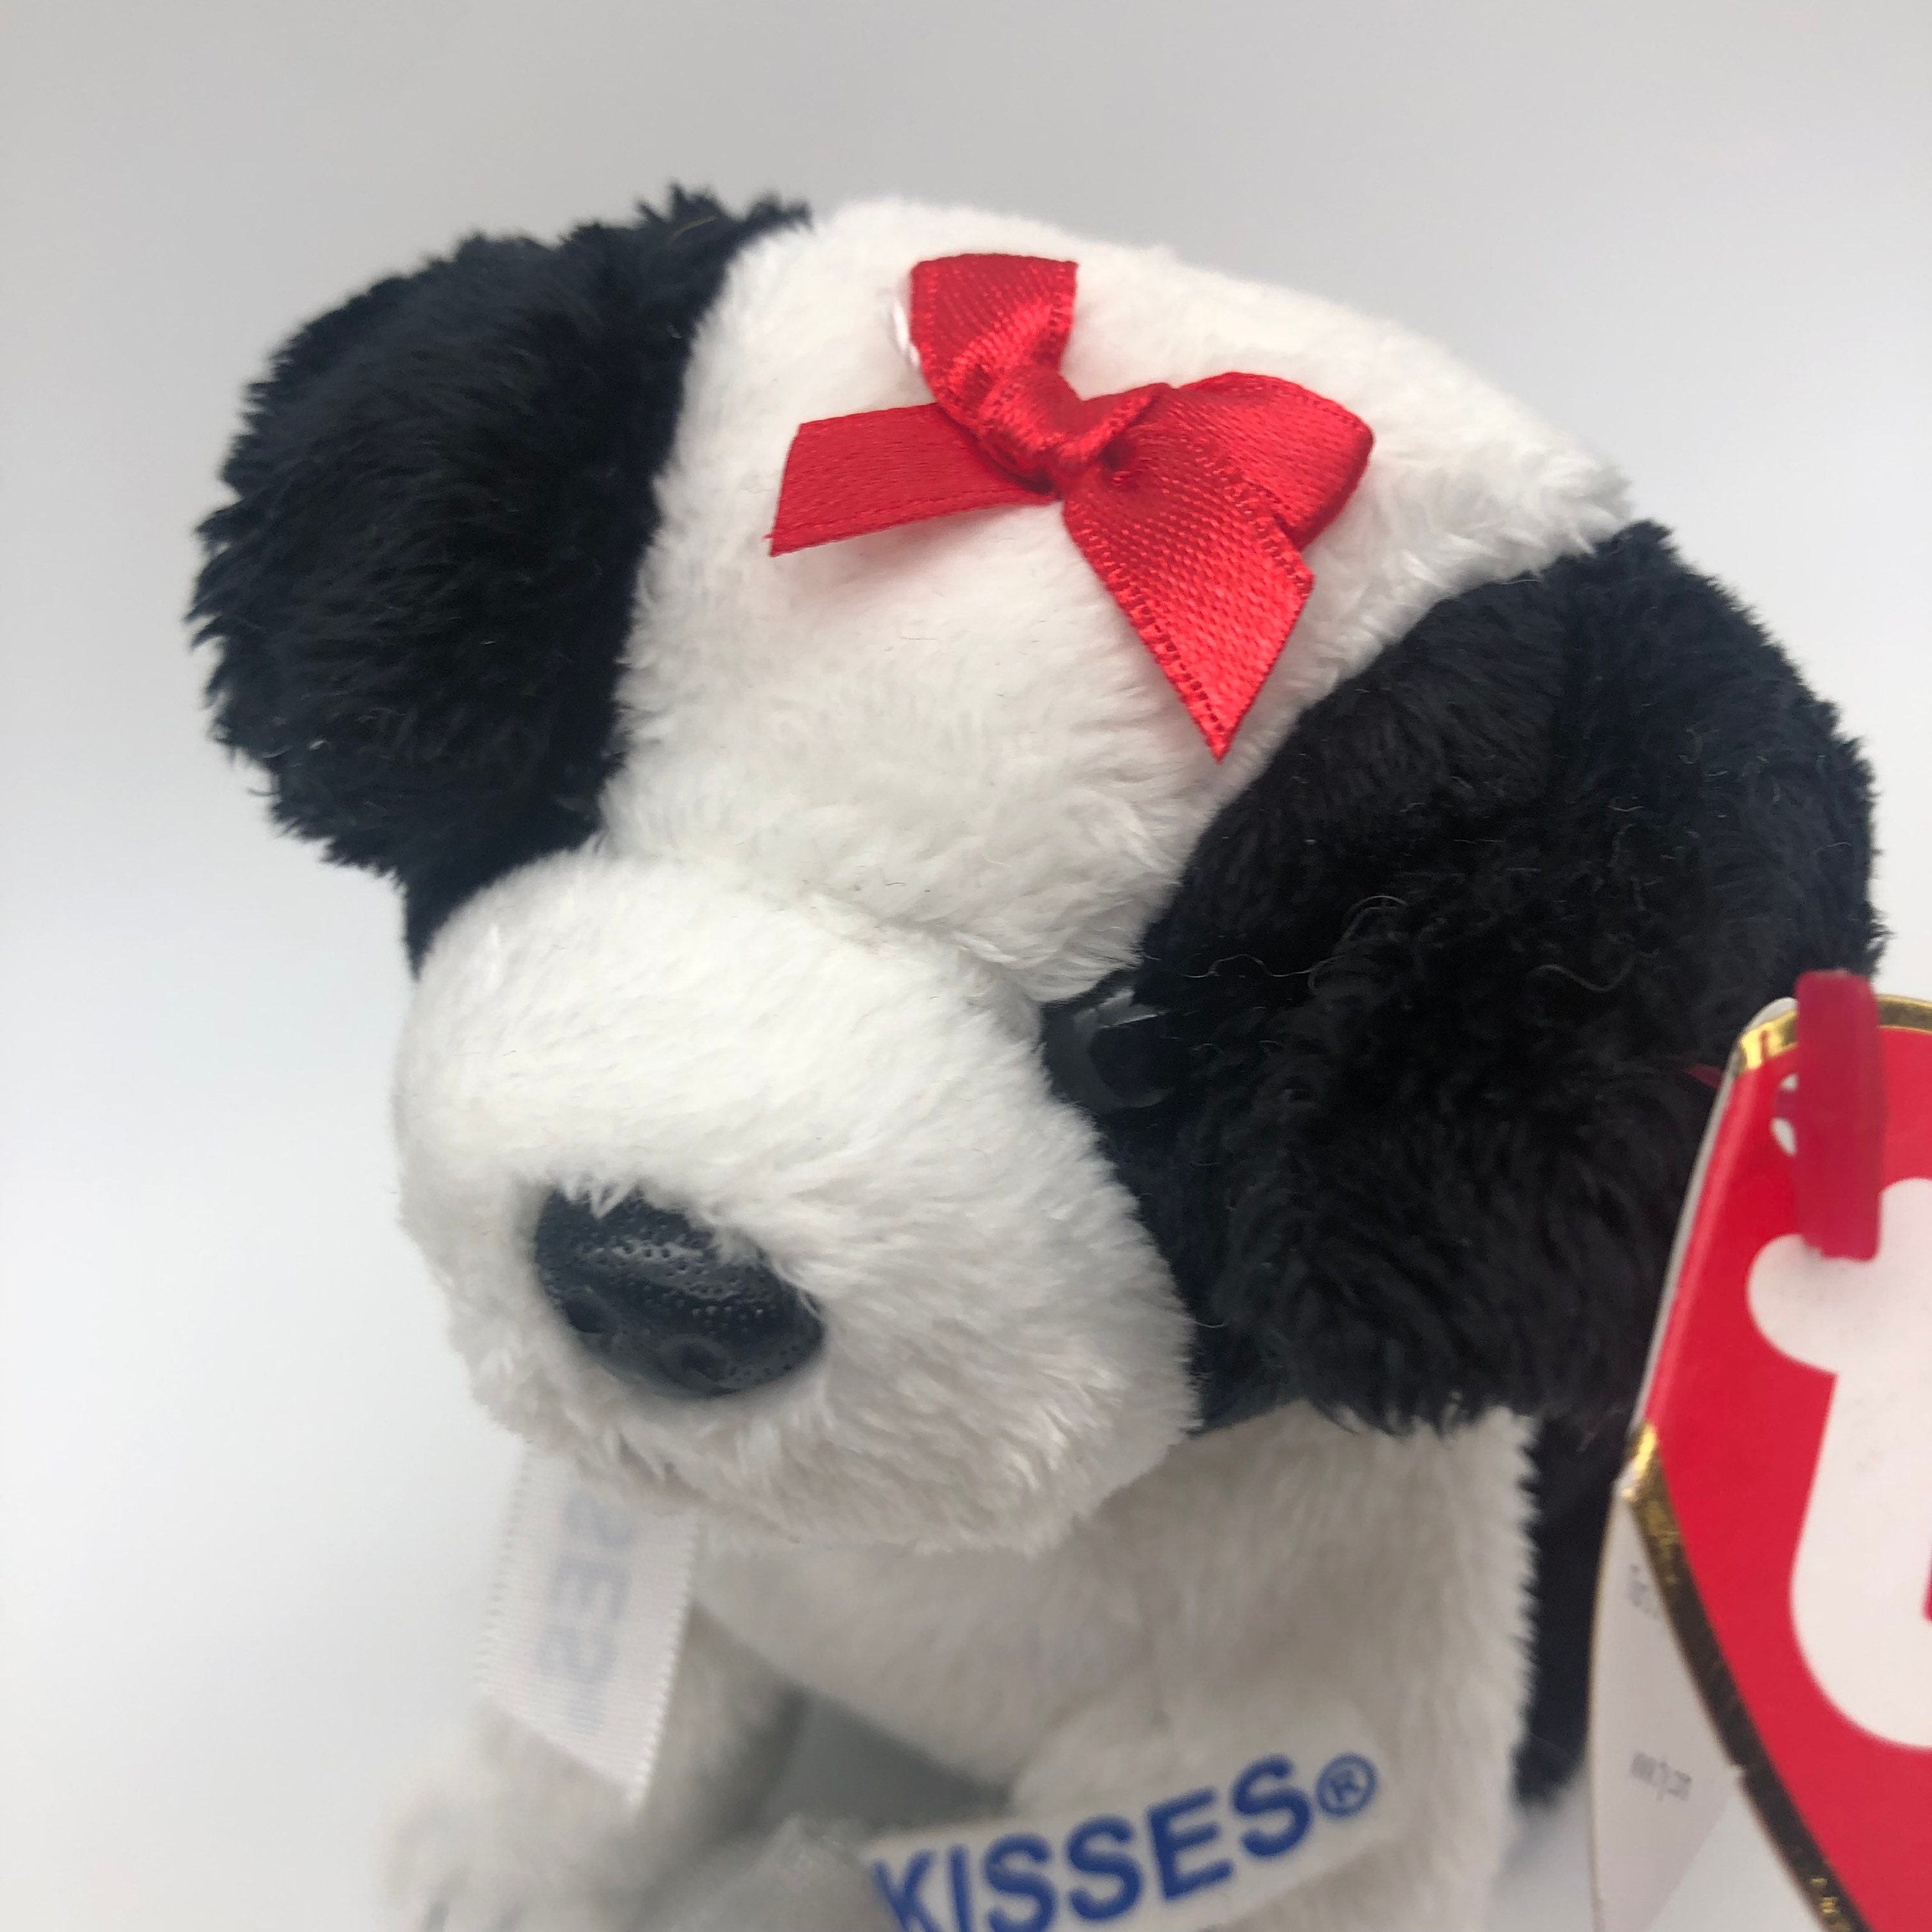 Ty Beanie Baby Cookies and Creme The Hershey's Kiss Dog 2007 Plush for sale online 